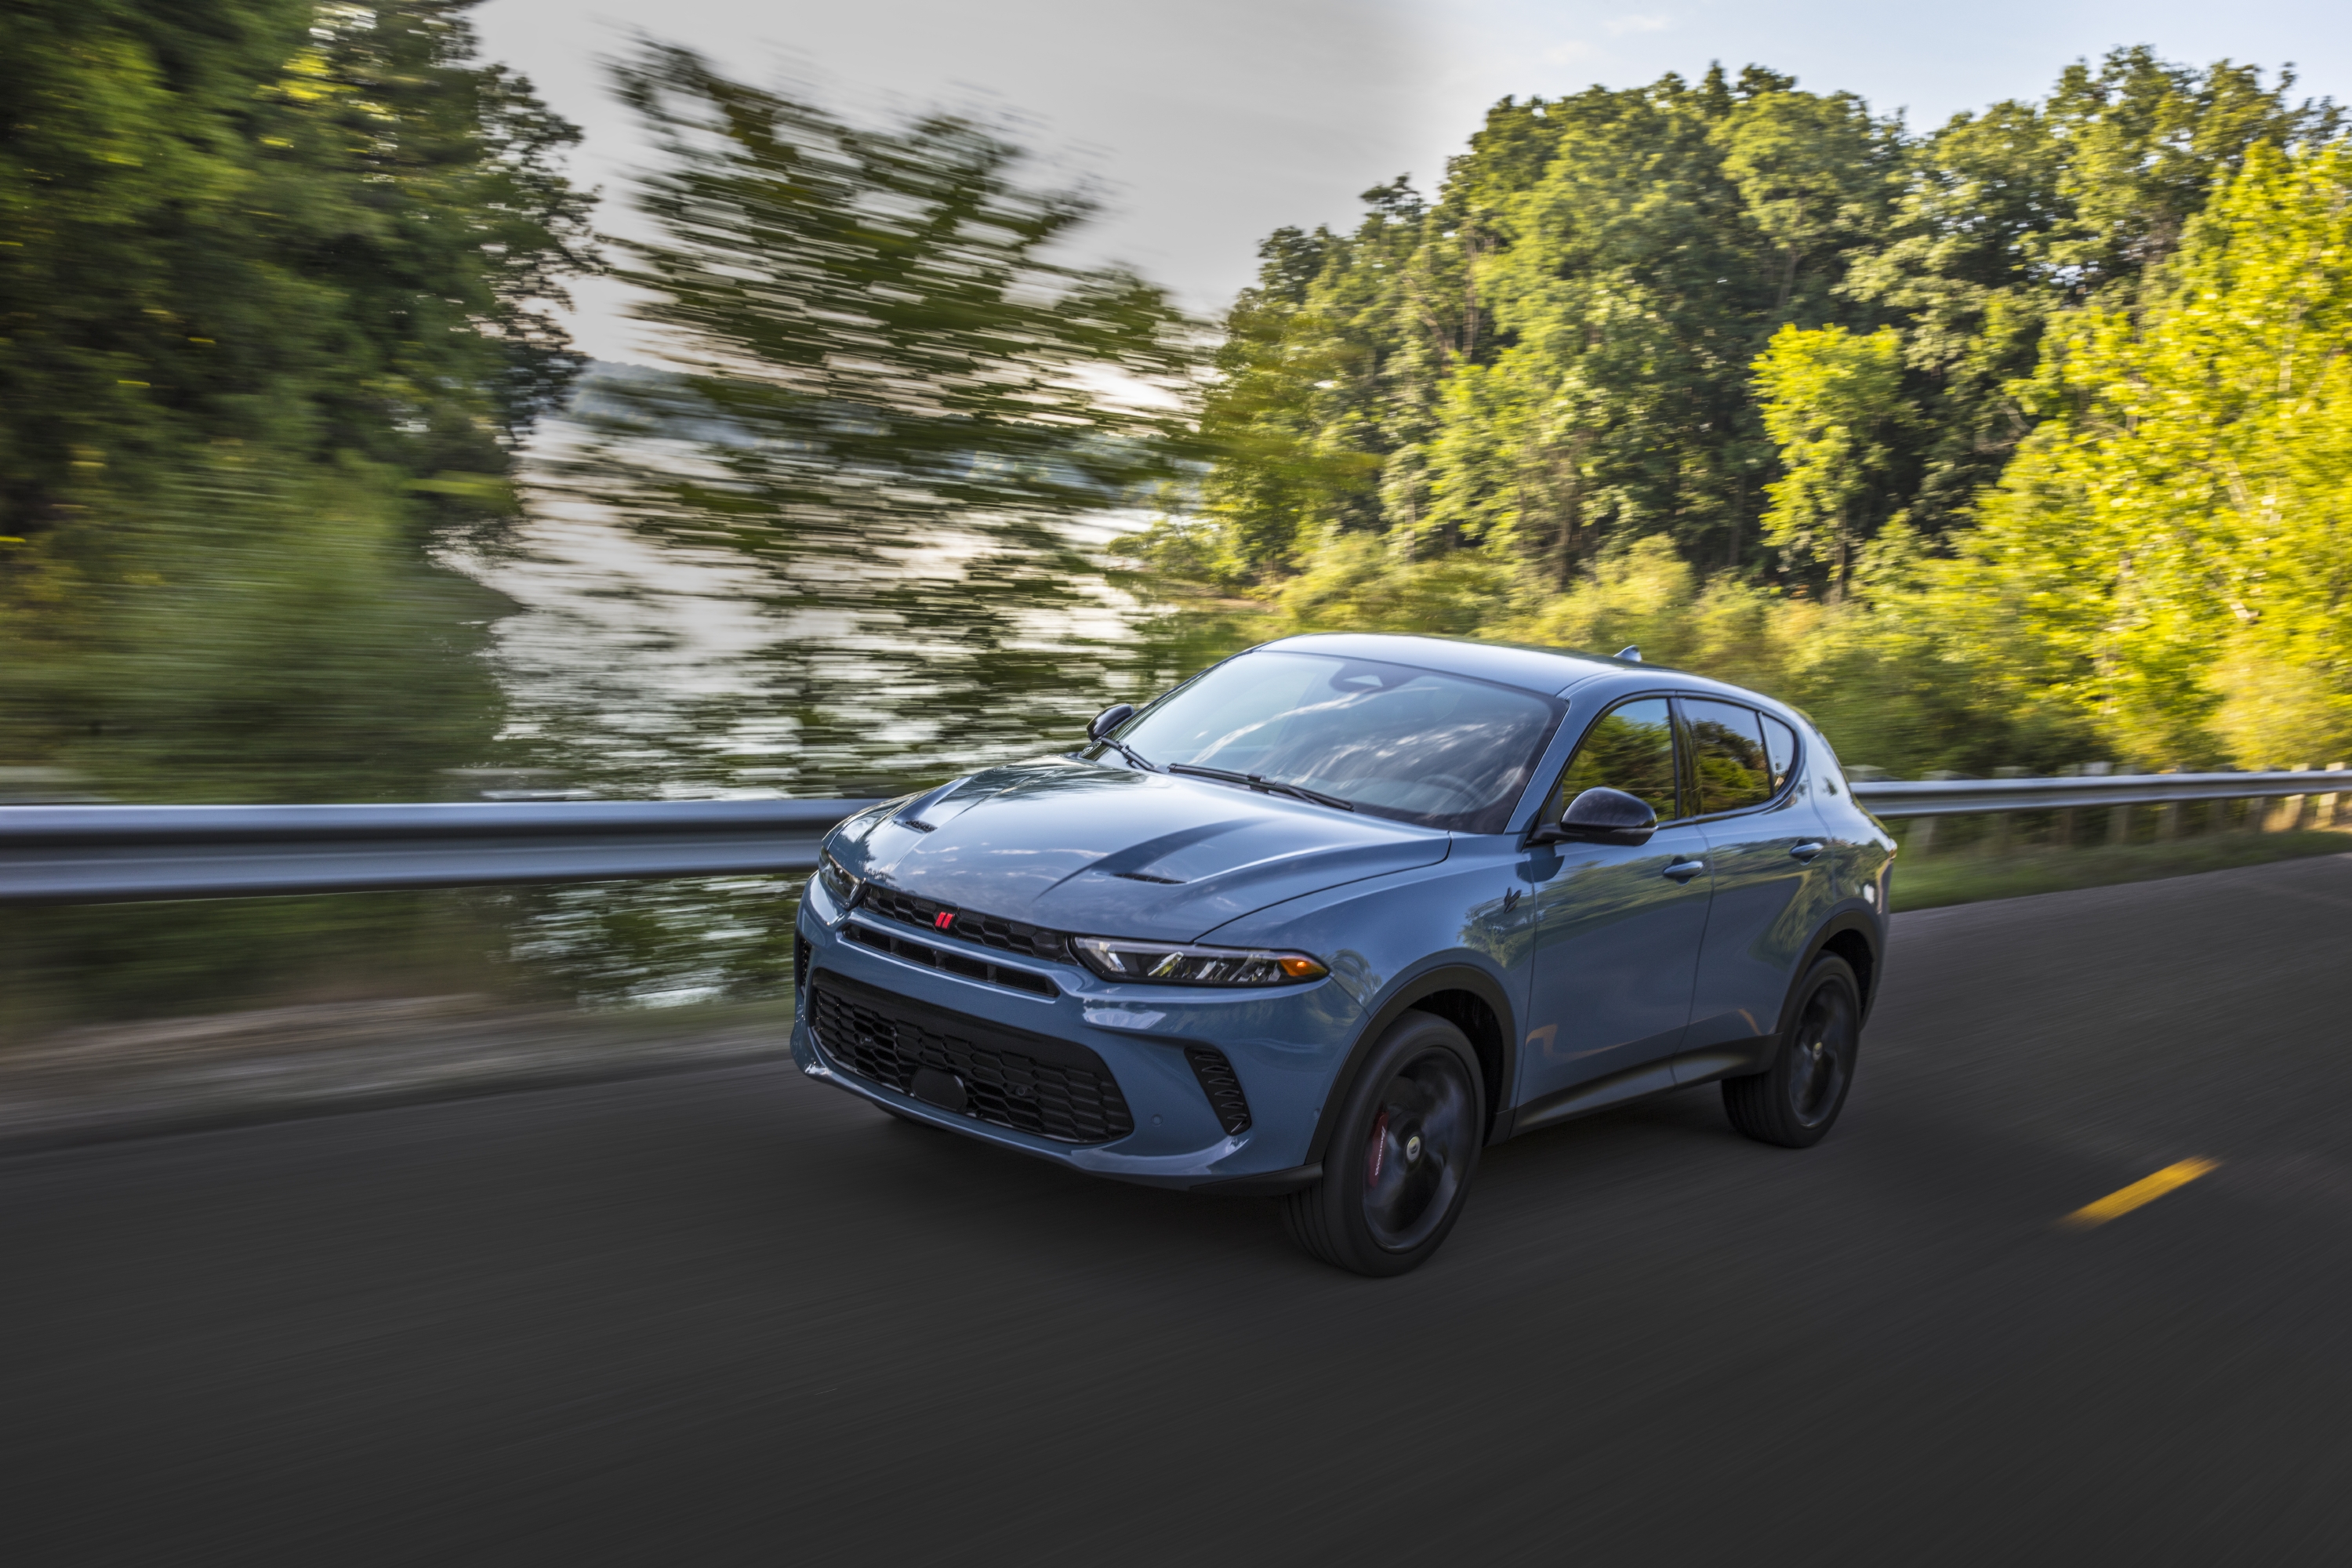 Dodge Hornet Returns for 2023; Hybrid Offering Launches Electrified Performance Future